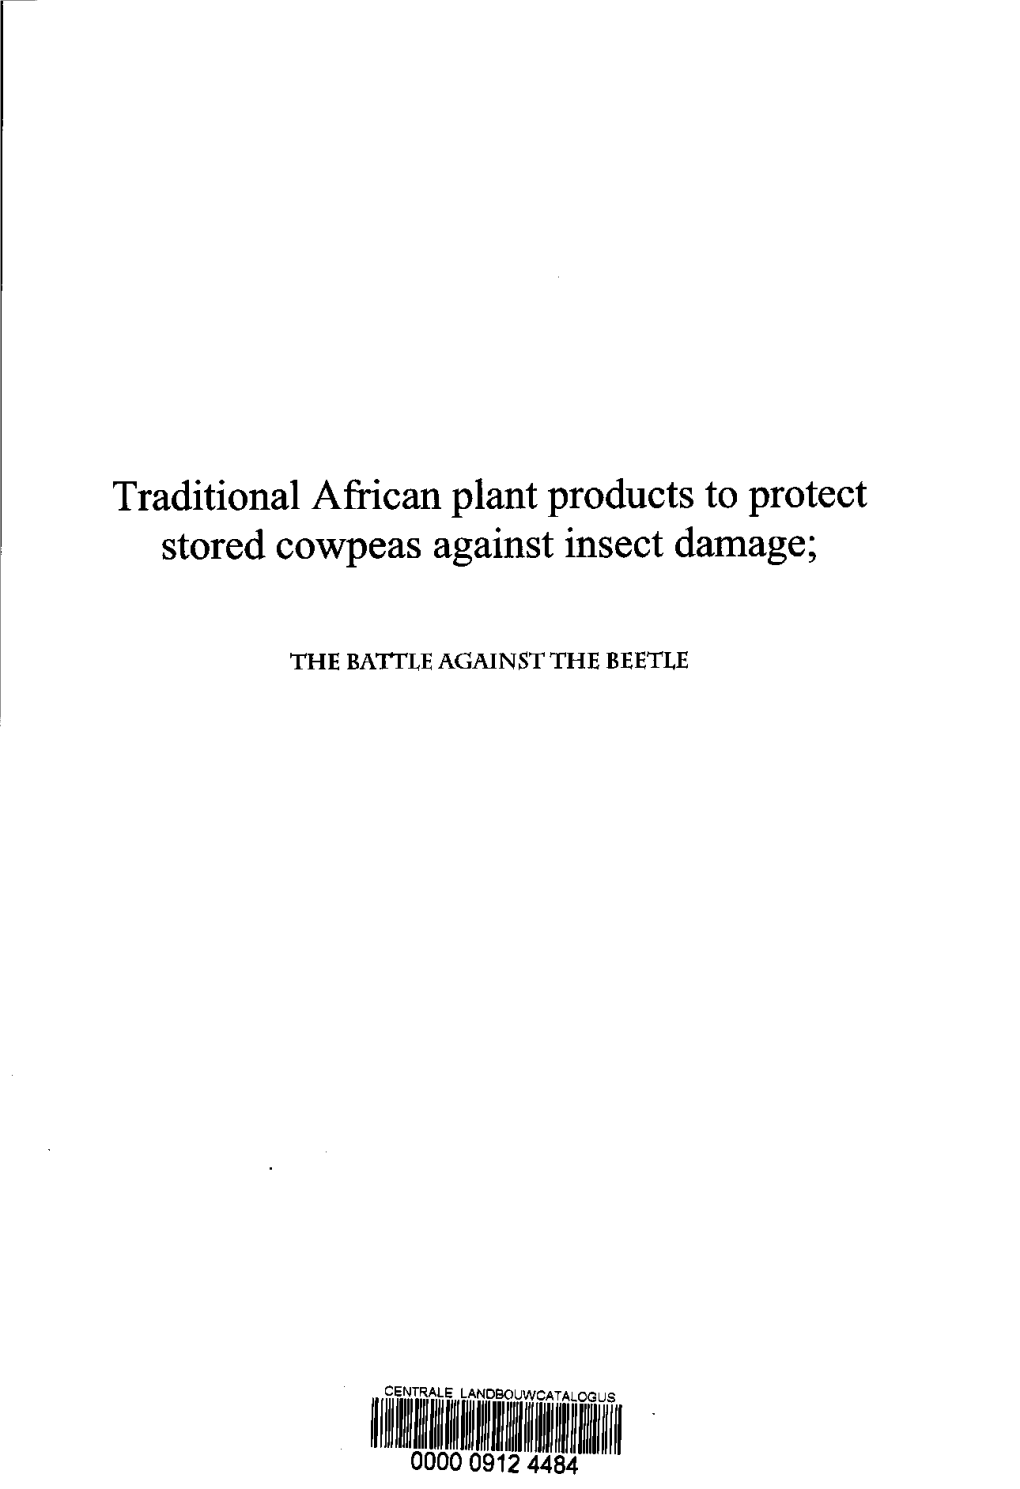 Traditional African Plant Products to Protect Stored Cowpeas Against Insect Damage; the BATTLEAGAINS TTH E BEETEE